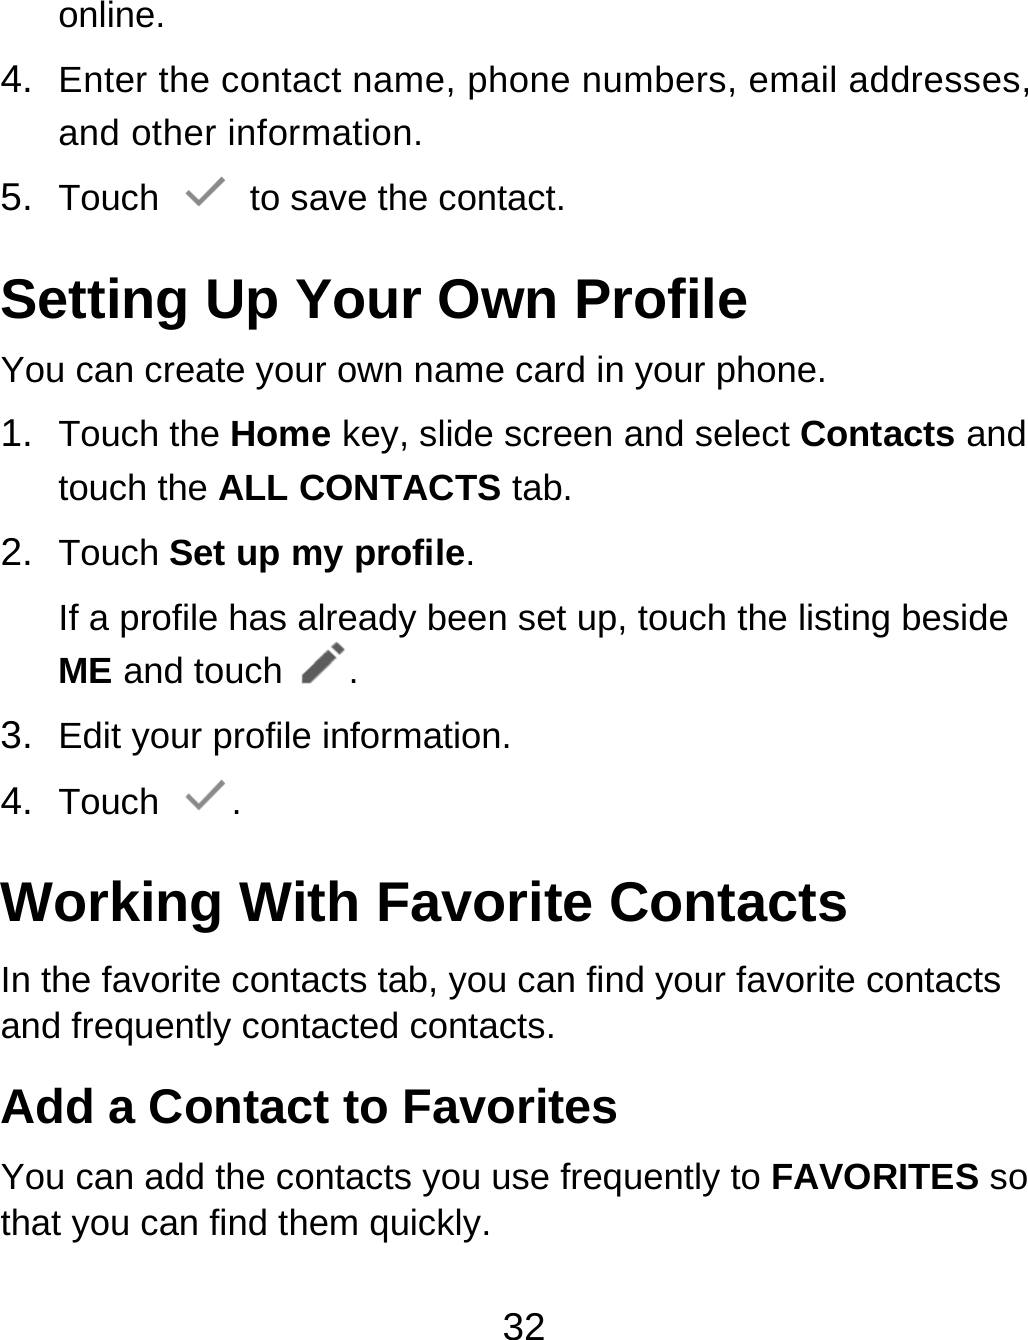 32 online. 4.  Enter the contact name, phone numbers, email addresses, and other information. 5.  Touch   to save the contact. Setting Up Your Own Profile You can create your own name card in your phone. 1.  Touch the Home key, slide screen and select Contacts and touch the ALL CONTACTS tab. 2.  Touch Set up my profile. If a profile has already been set up, touch the listing beside ME and touch . 3.  Edit your profile information. 4.  Touch  . Working With Favorite Contacts In the favorite contacts tab, you can find your favorite contacts and frequently contacted contacts. Add a Contact to Favorites You can add the contacts you use frequently to FAVORITES so that you can find them quickly. 